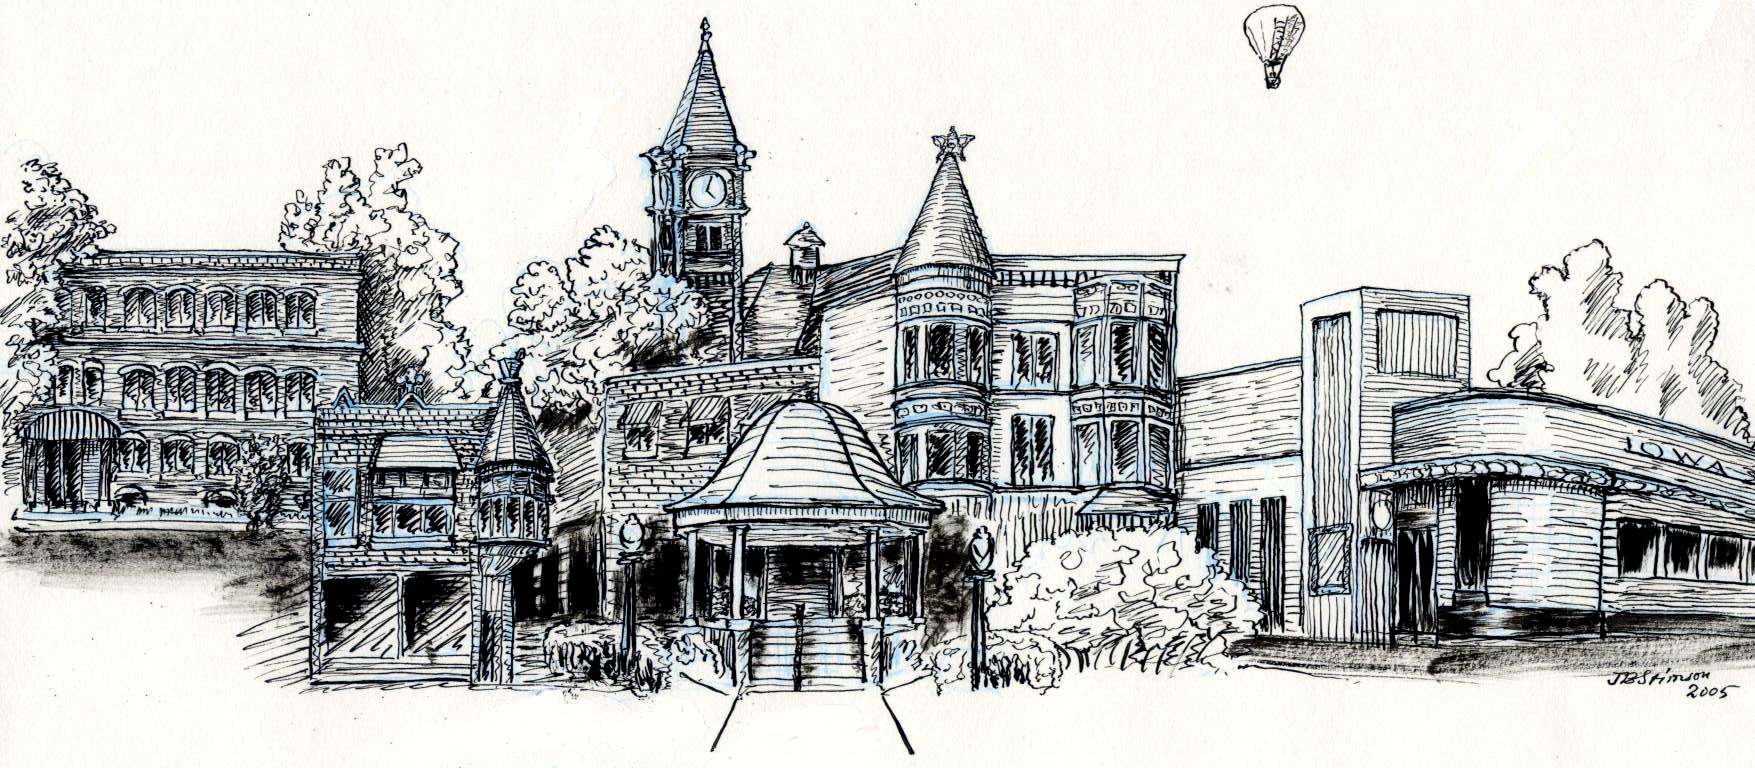 John Stimson's drawing of the Square in Fairfield, Iowa